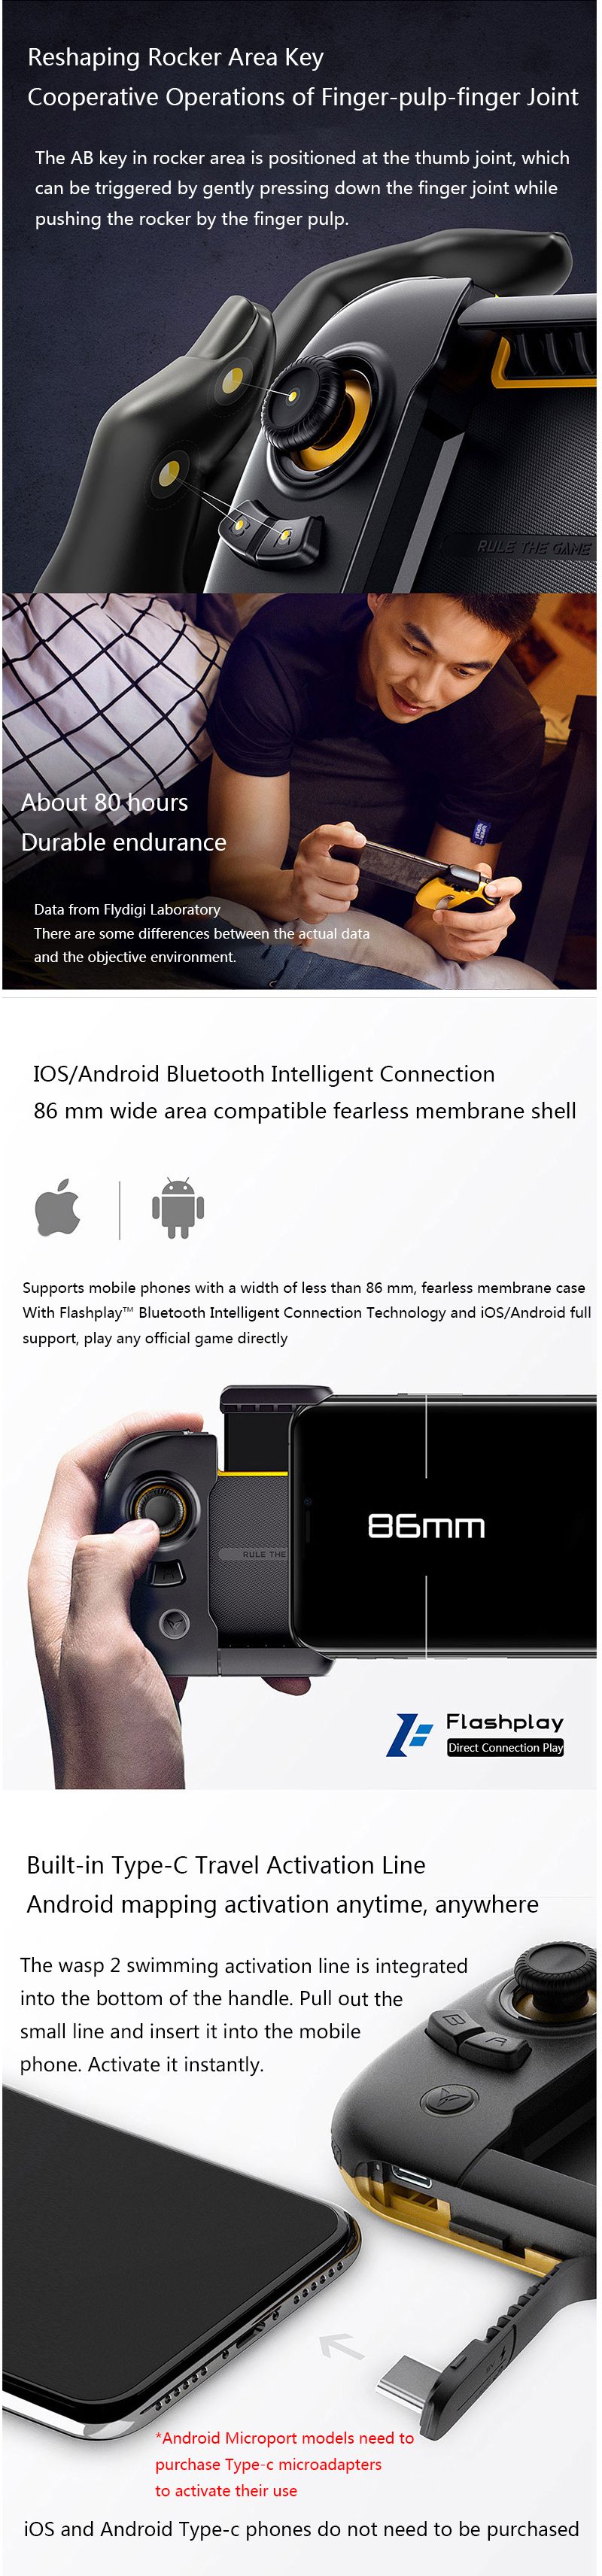 Flydigi-Wasp2-bluetooth-Gamepad-with-B1-Mobile-Phone-Cooler-Physical-Cooling-Fan-for-PUBG-Games-for--1543267